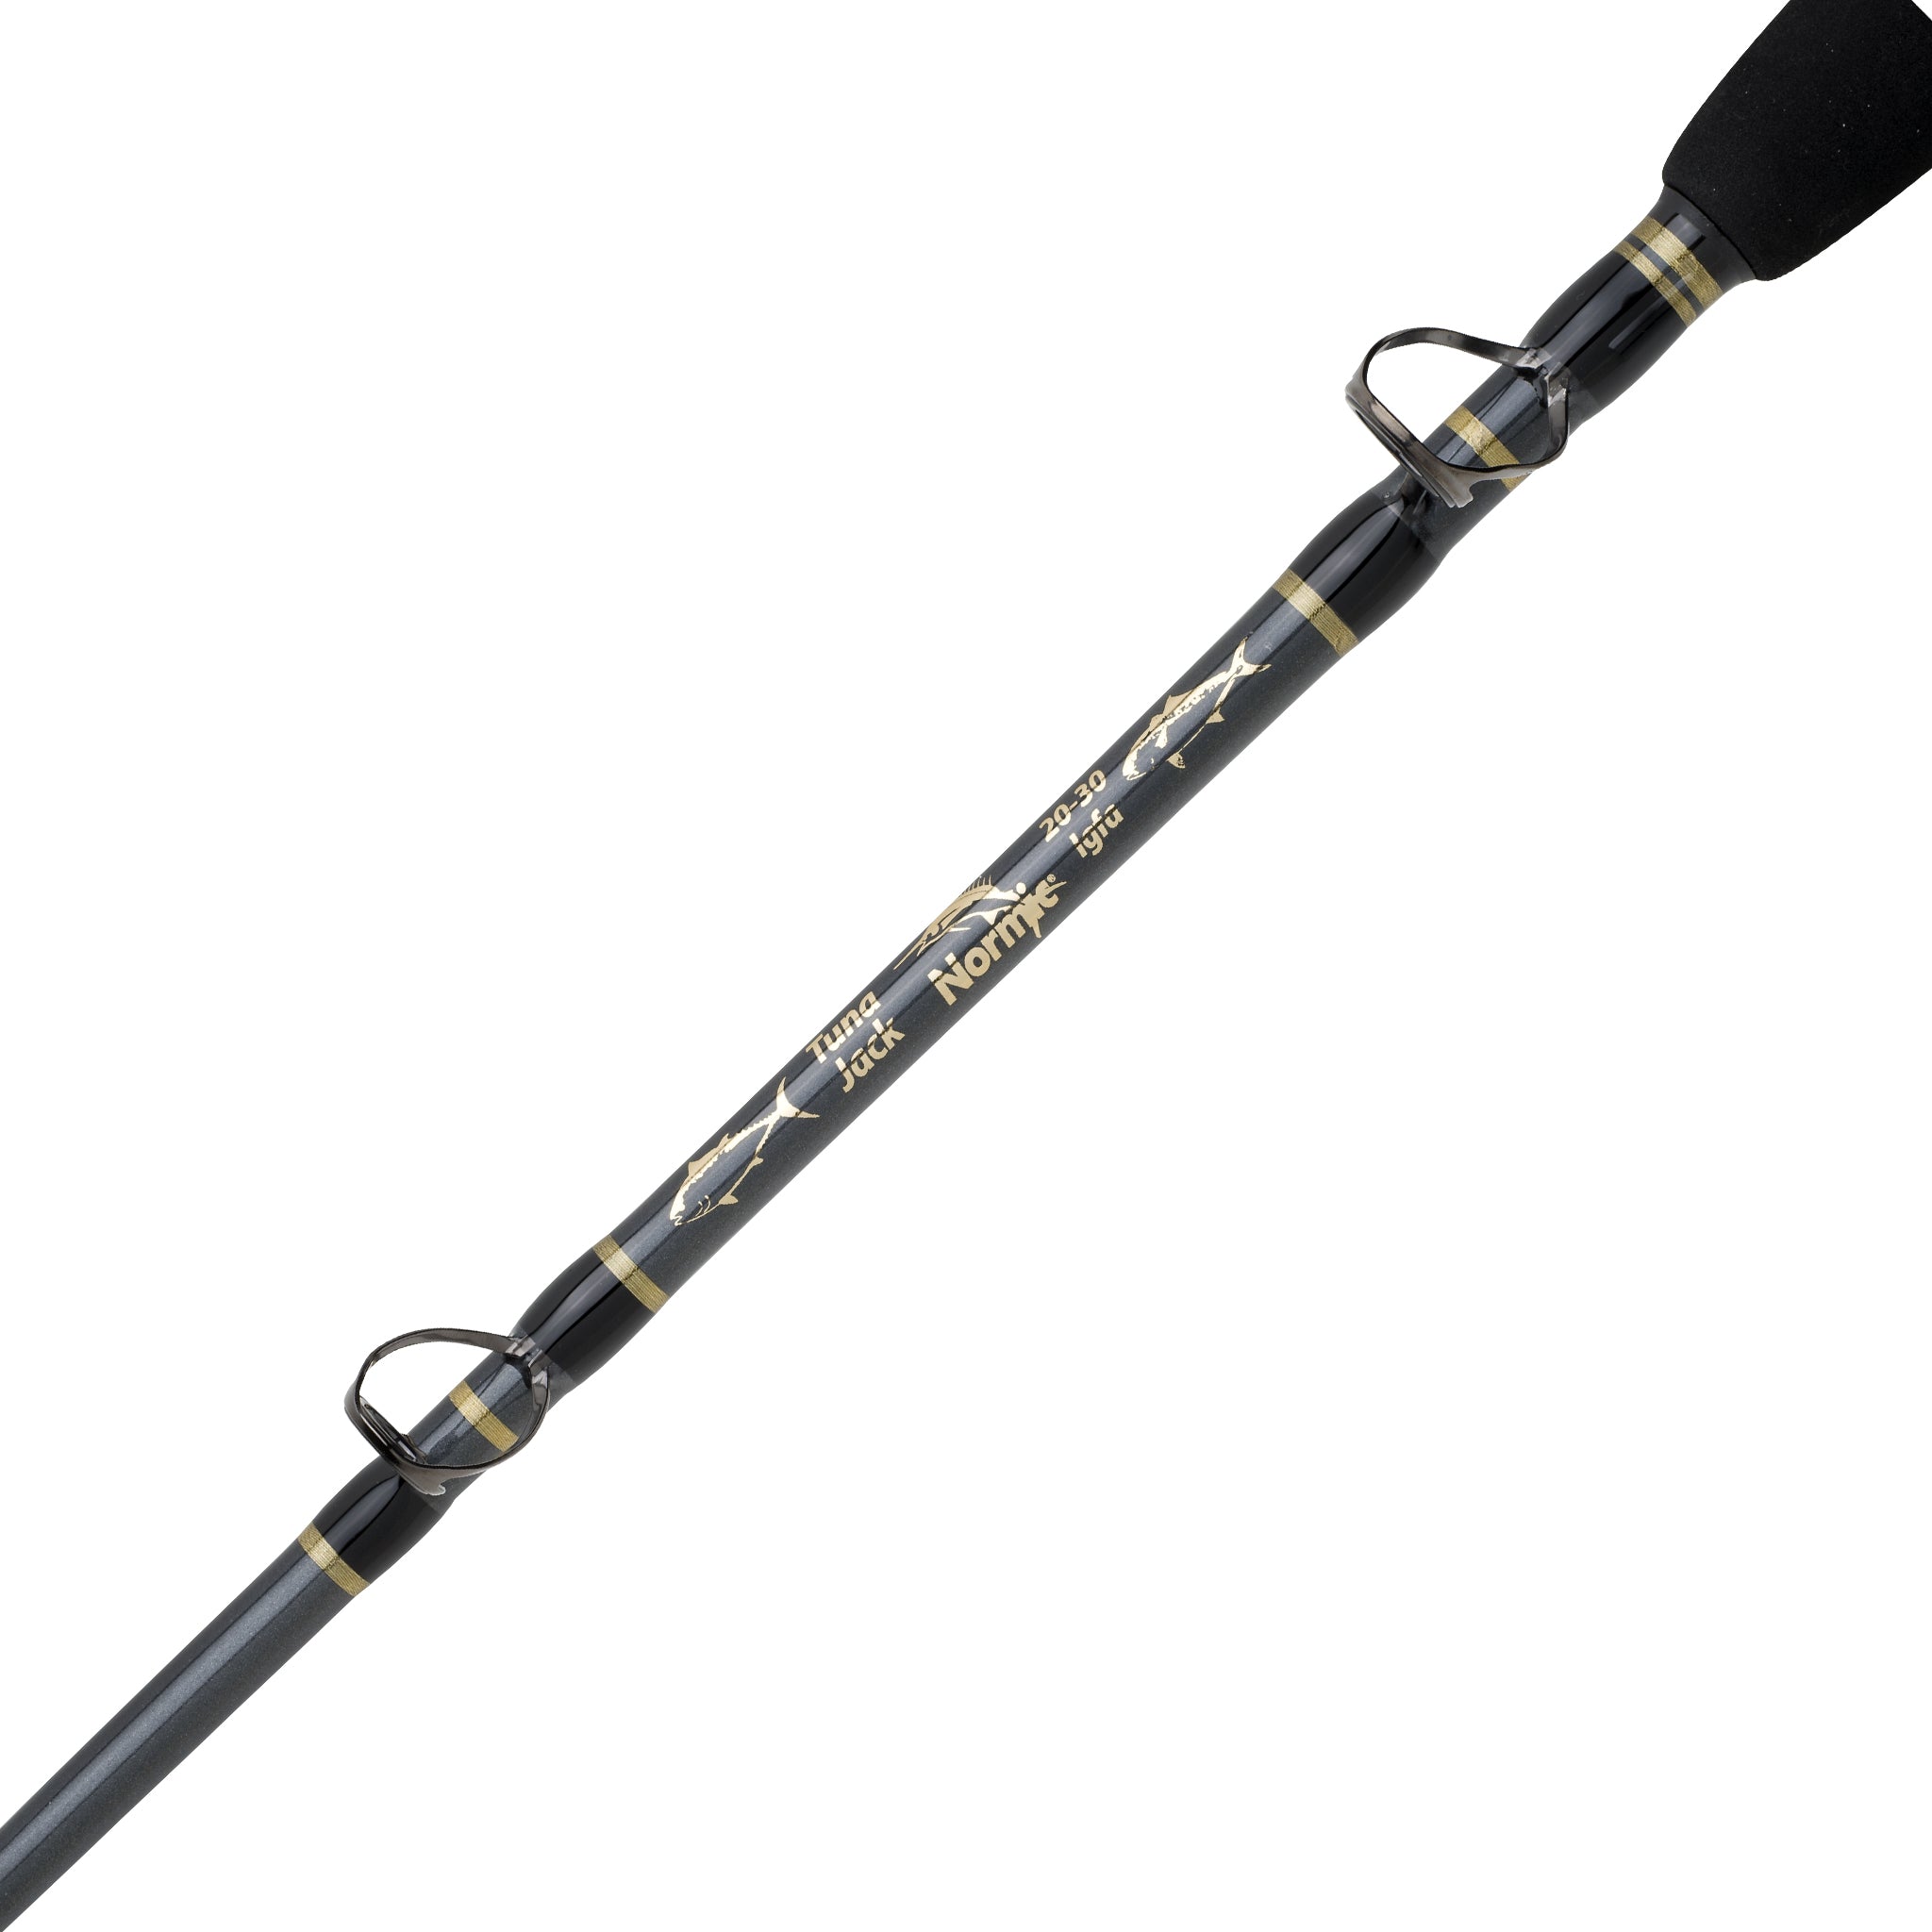 Tuna Jack-Light and powerful S1 barrel-fishing for carp and